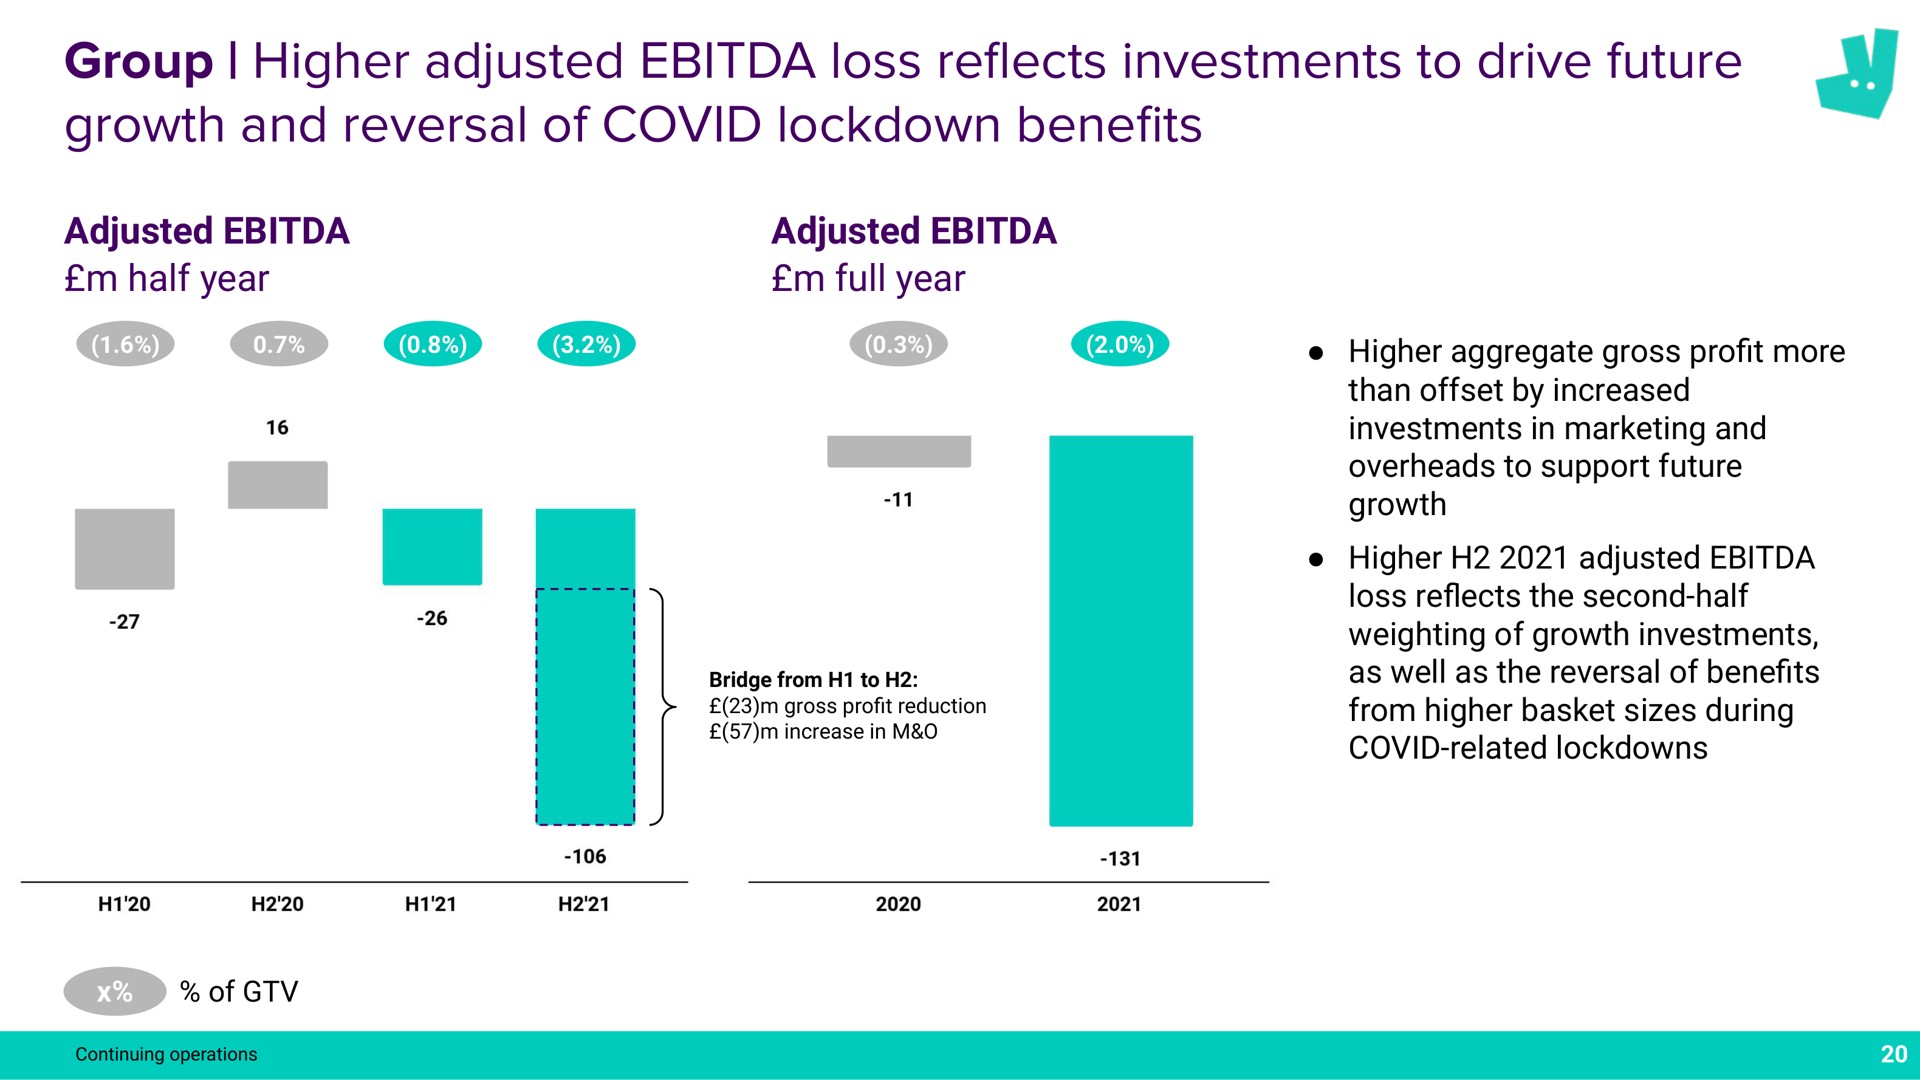 group higher adjusted loss investments to drive future growth and reversal of covid bene reflects a benefits | Deliveroo